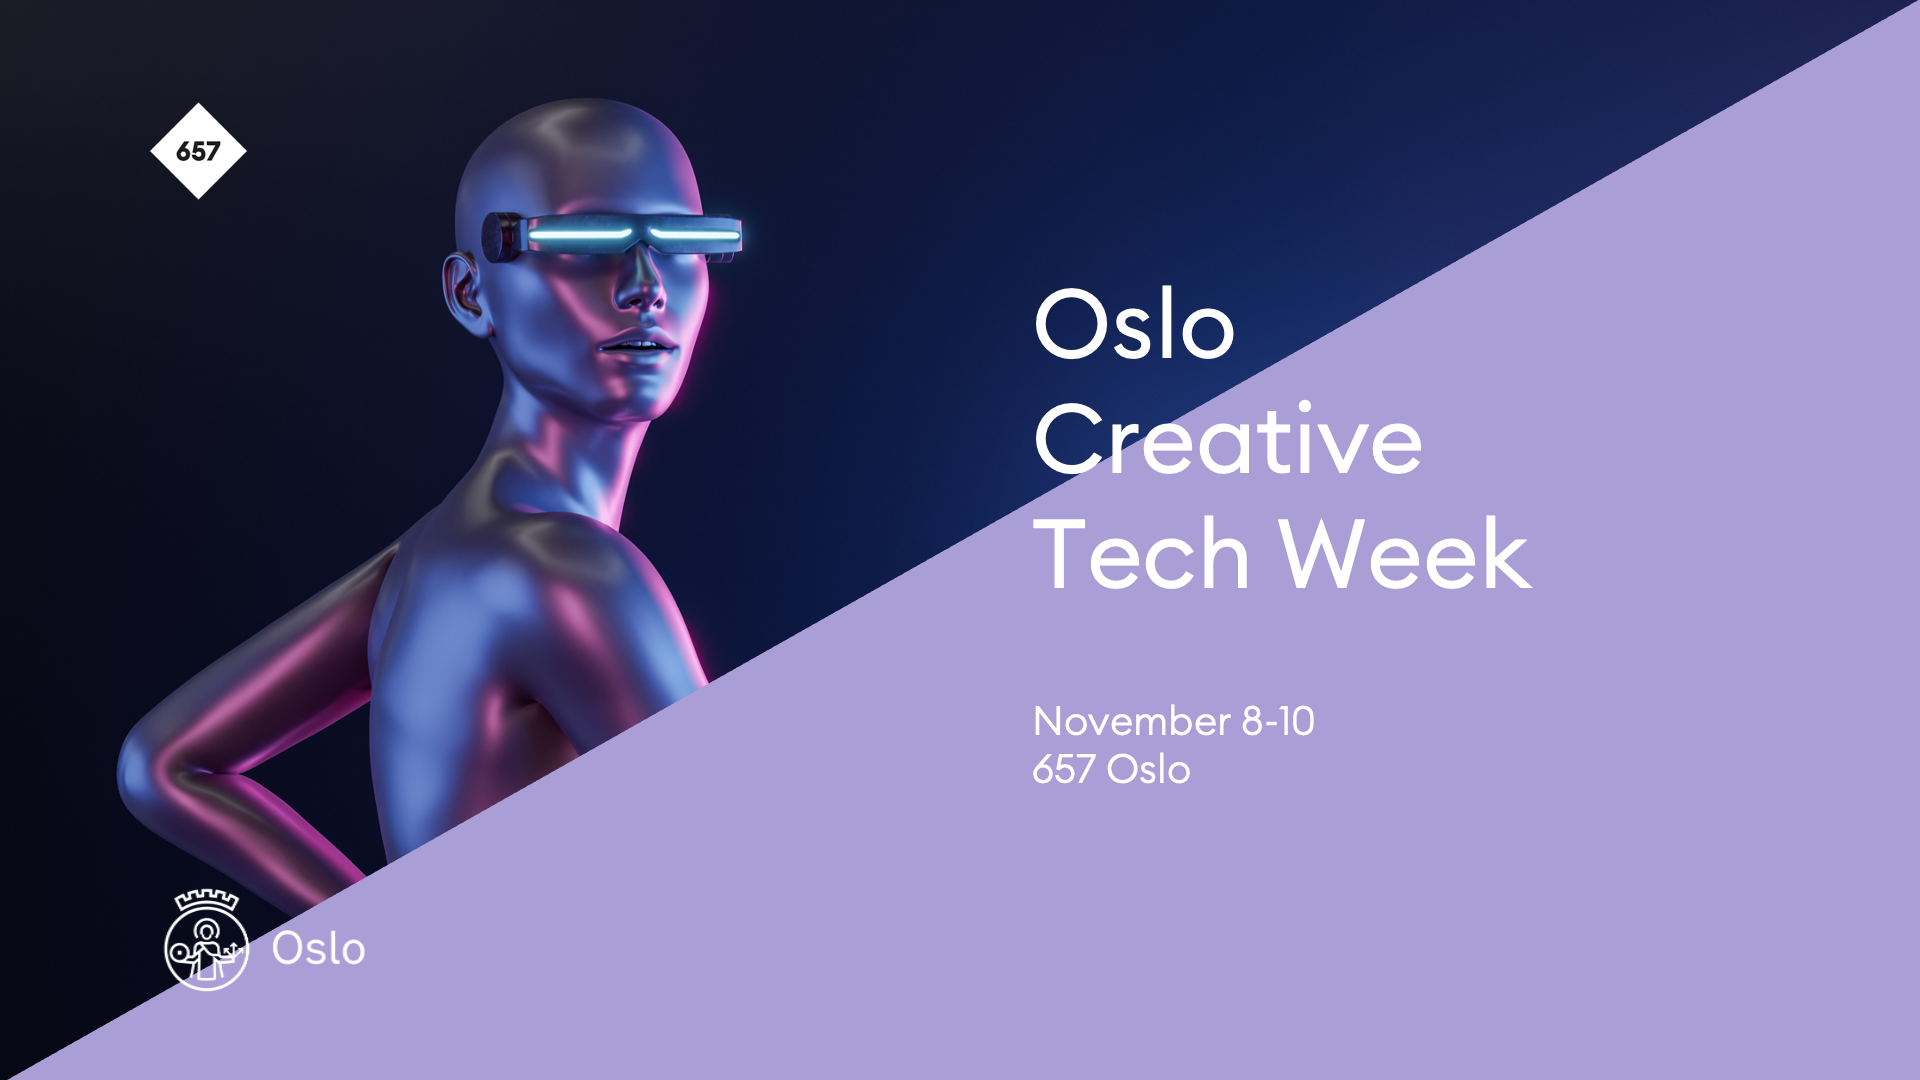 Cover Image for Broadcast cooperates with Oslo Creative Tech Week 2022 